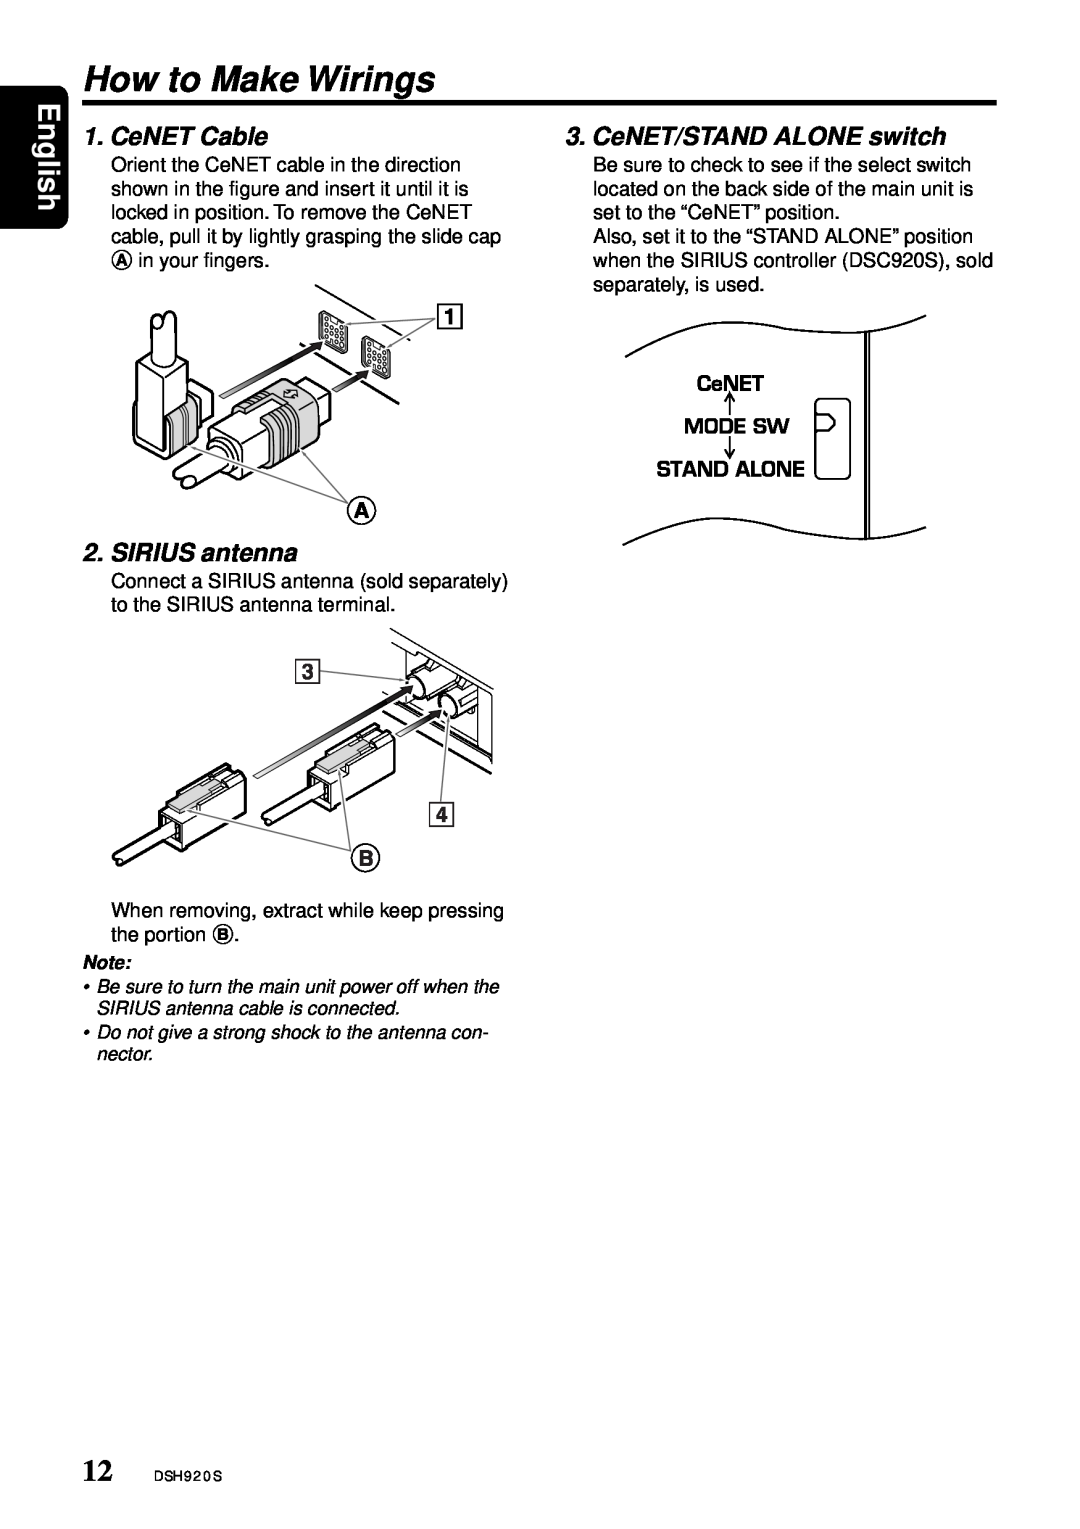 Clarion DSH920S owner manual How to Make Wirings, CeNET Cable, CeNET/STAND ALONE switch, SIRIUS antenna, English 